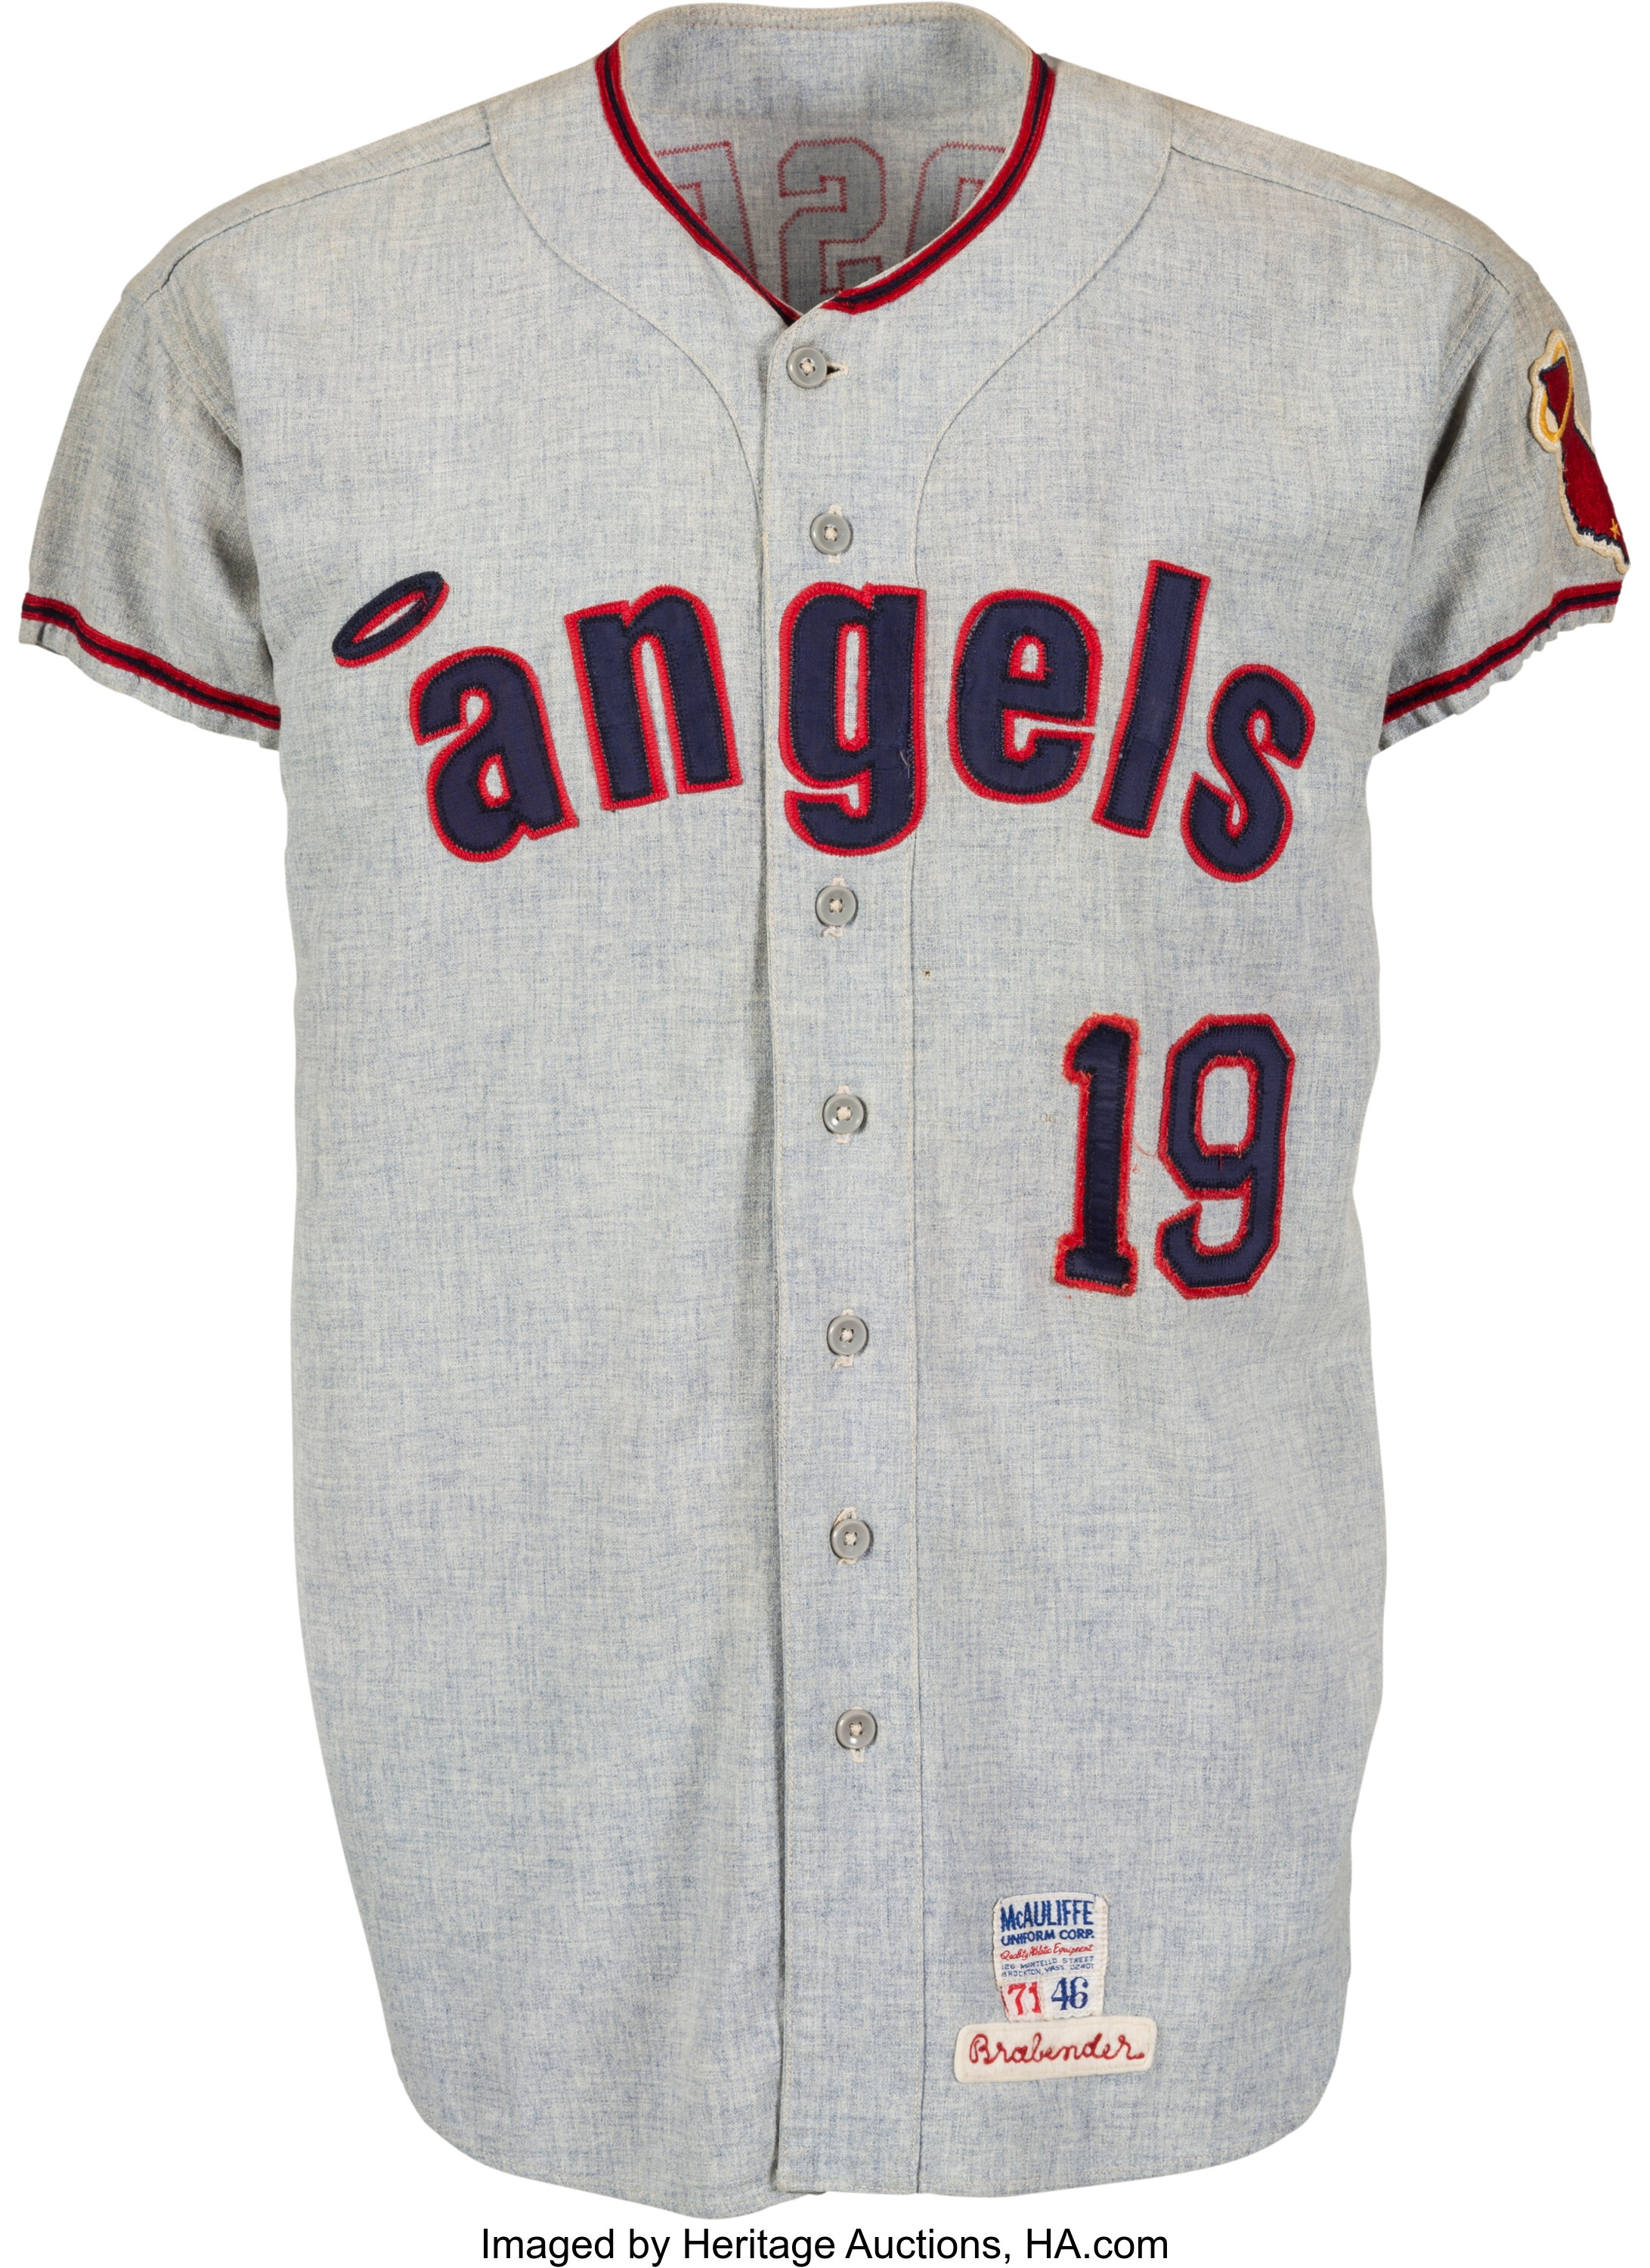 1971 Jerry Moses Game Worn California Angels Jersey. Baseball